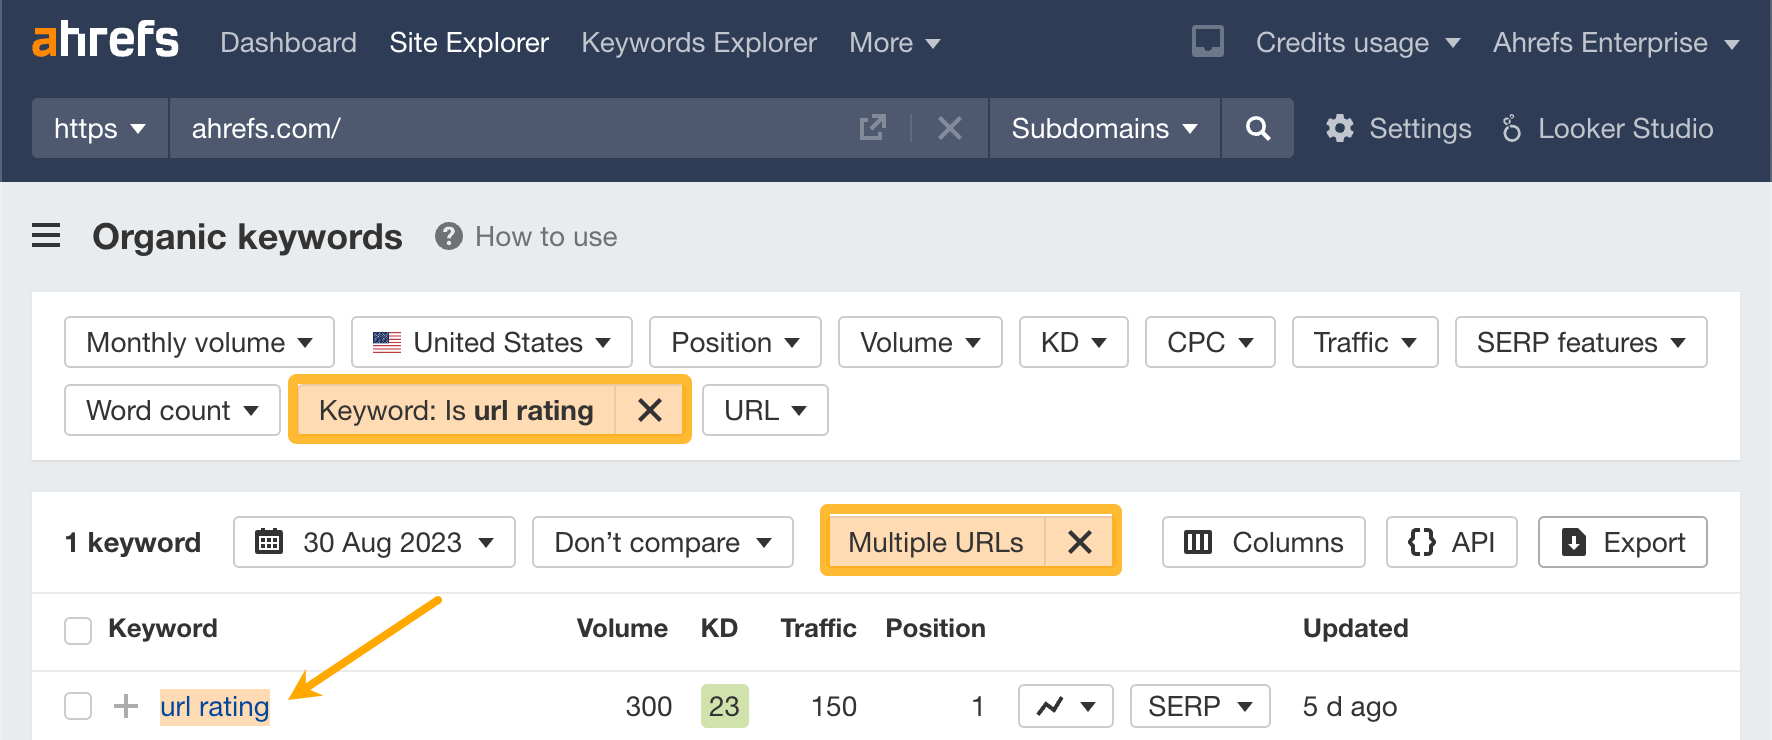 How to find keywords with multiple URLs ranking in Ahrefs' Site Explorer
